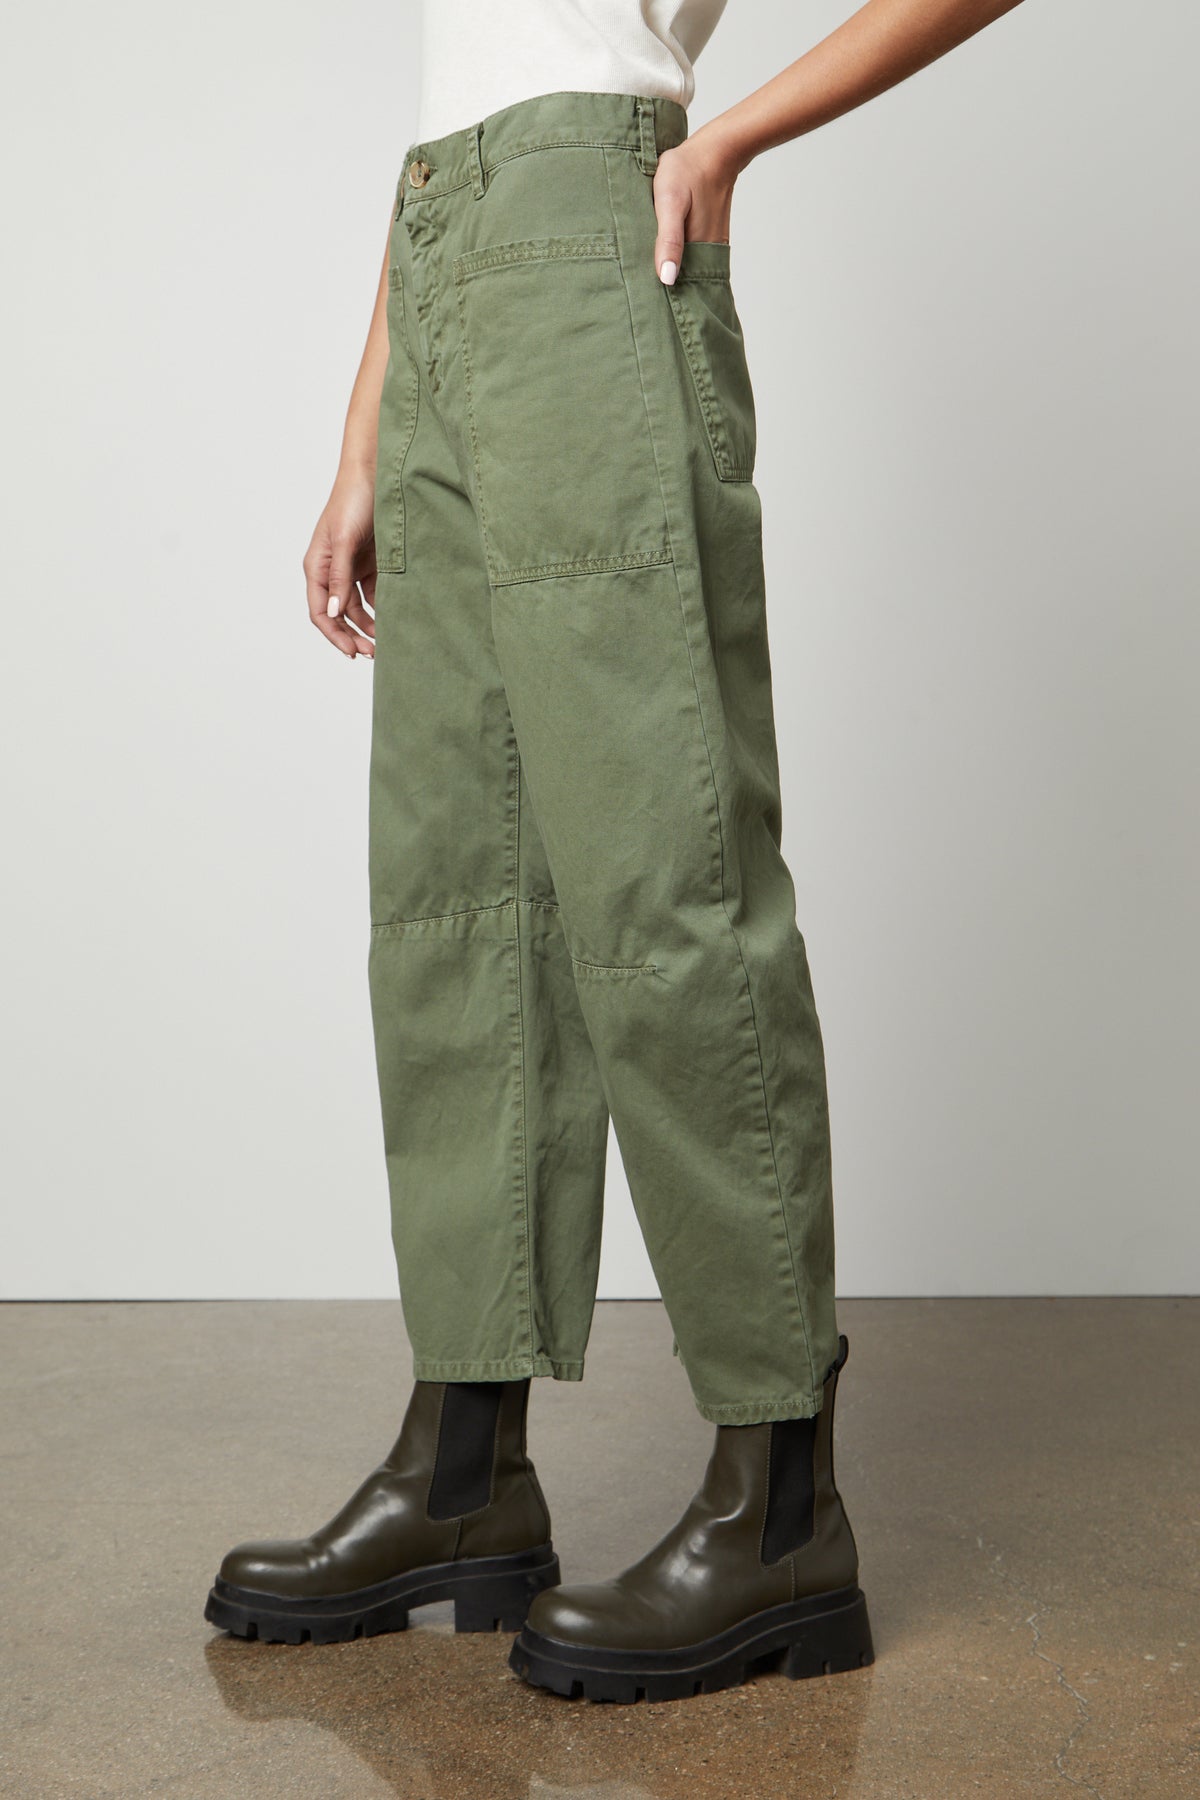 A woman wearing the Velvet by Graham & Spencer BRYLIE SANDED TWILL UTILITY PANT made of cotton twill and featuring patch pockets.-36118556573889